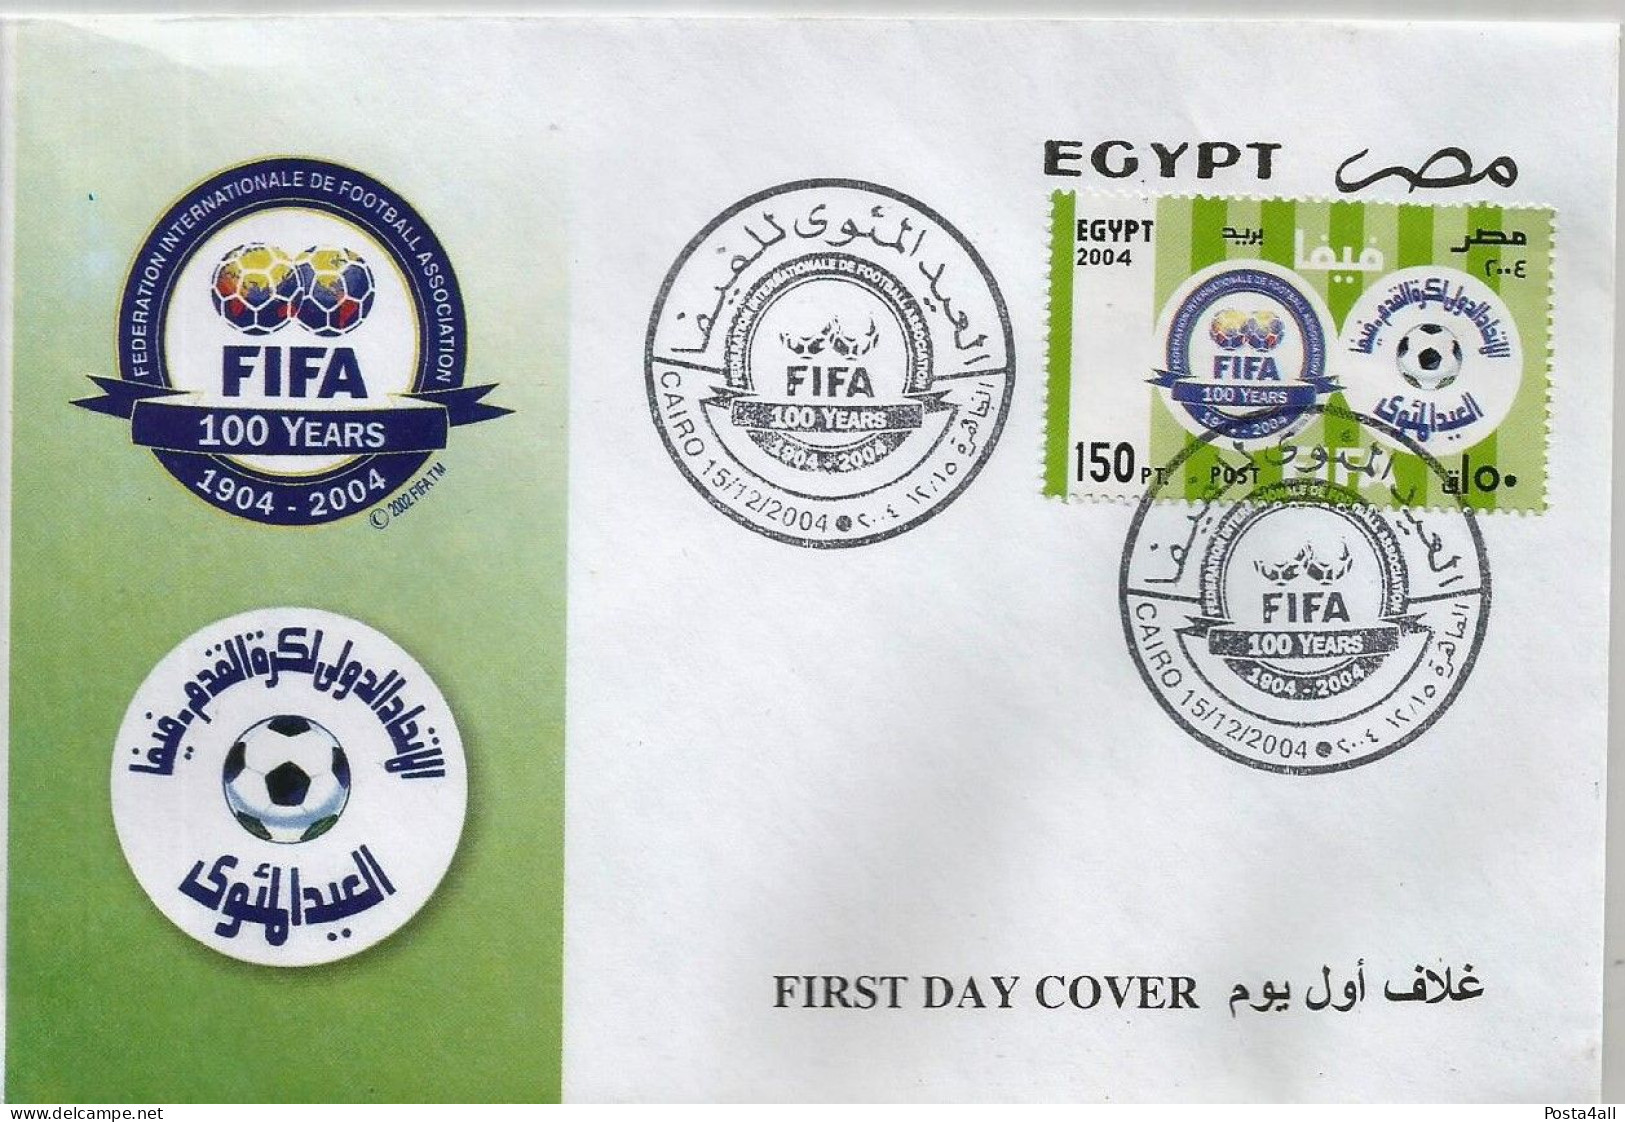 Egypt  - 2004 The 100th Anniversary Of FIFA (Federation Internationale De Football Association)  - Complete Issue - FDC - Storia Postale